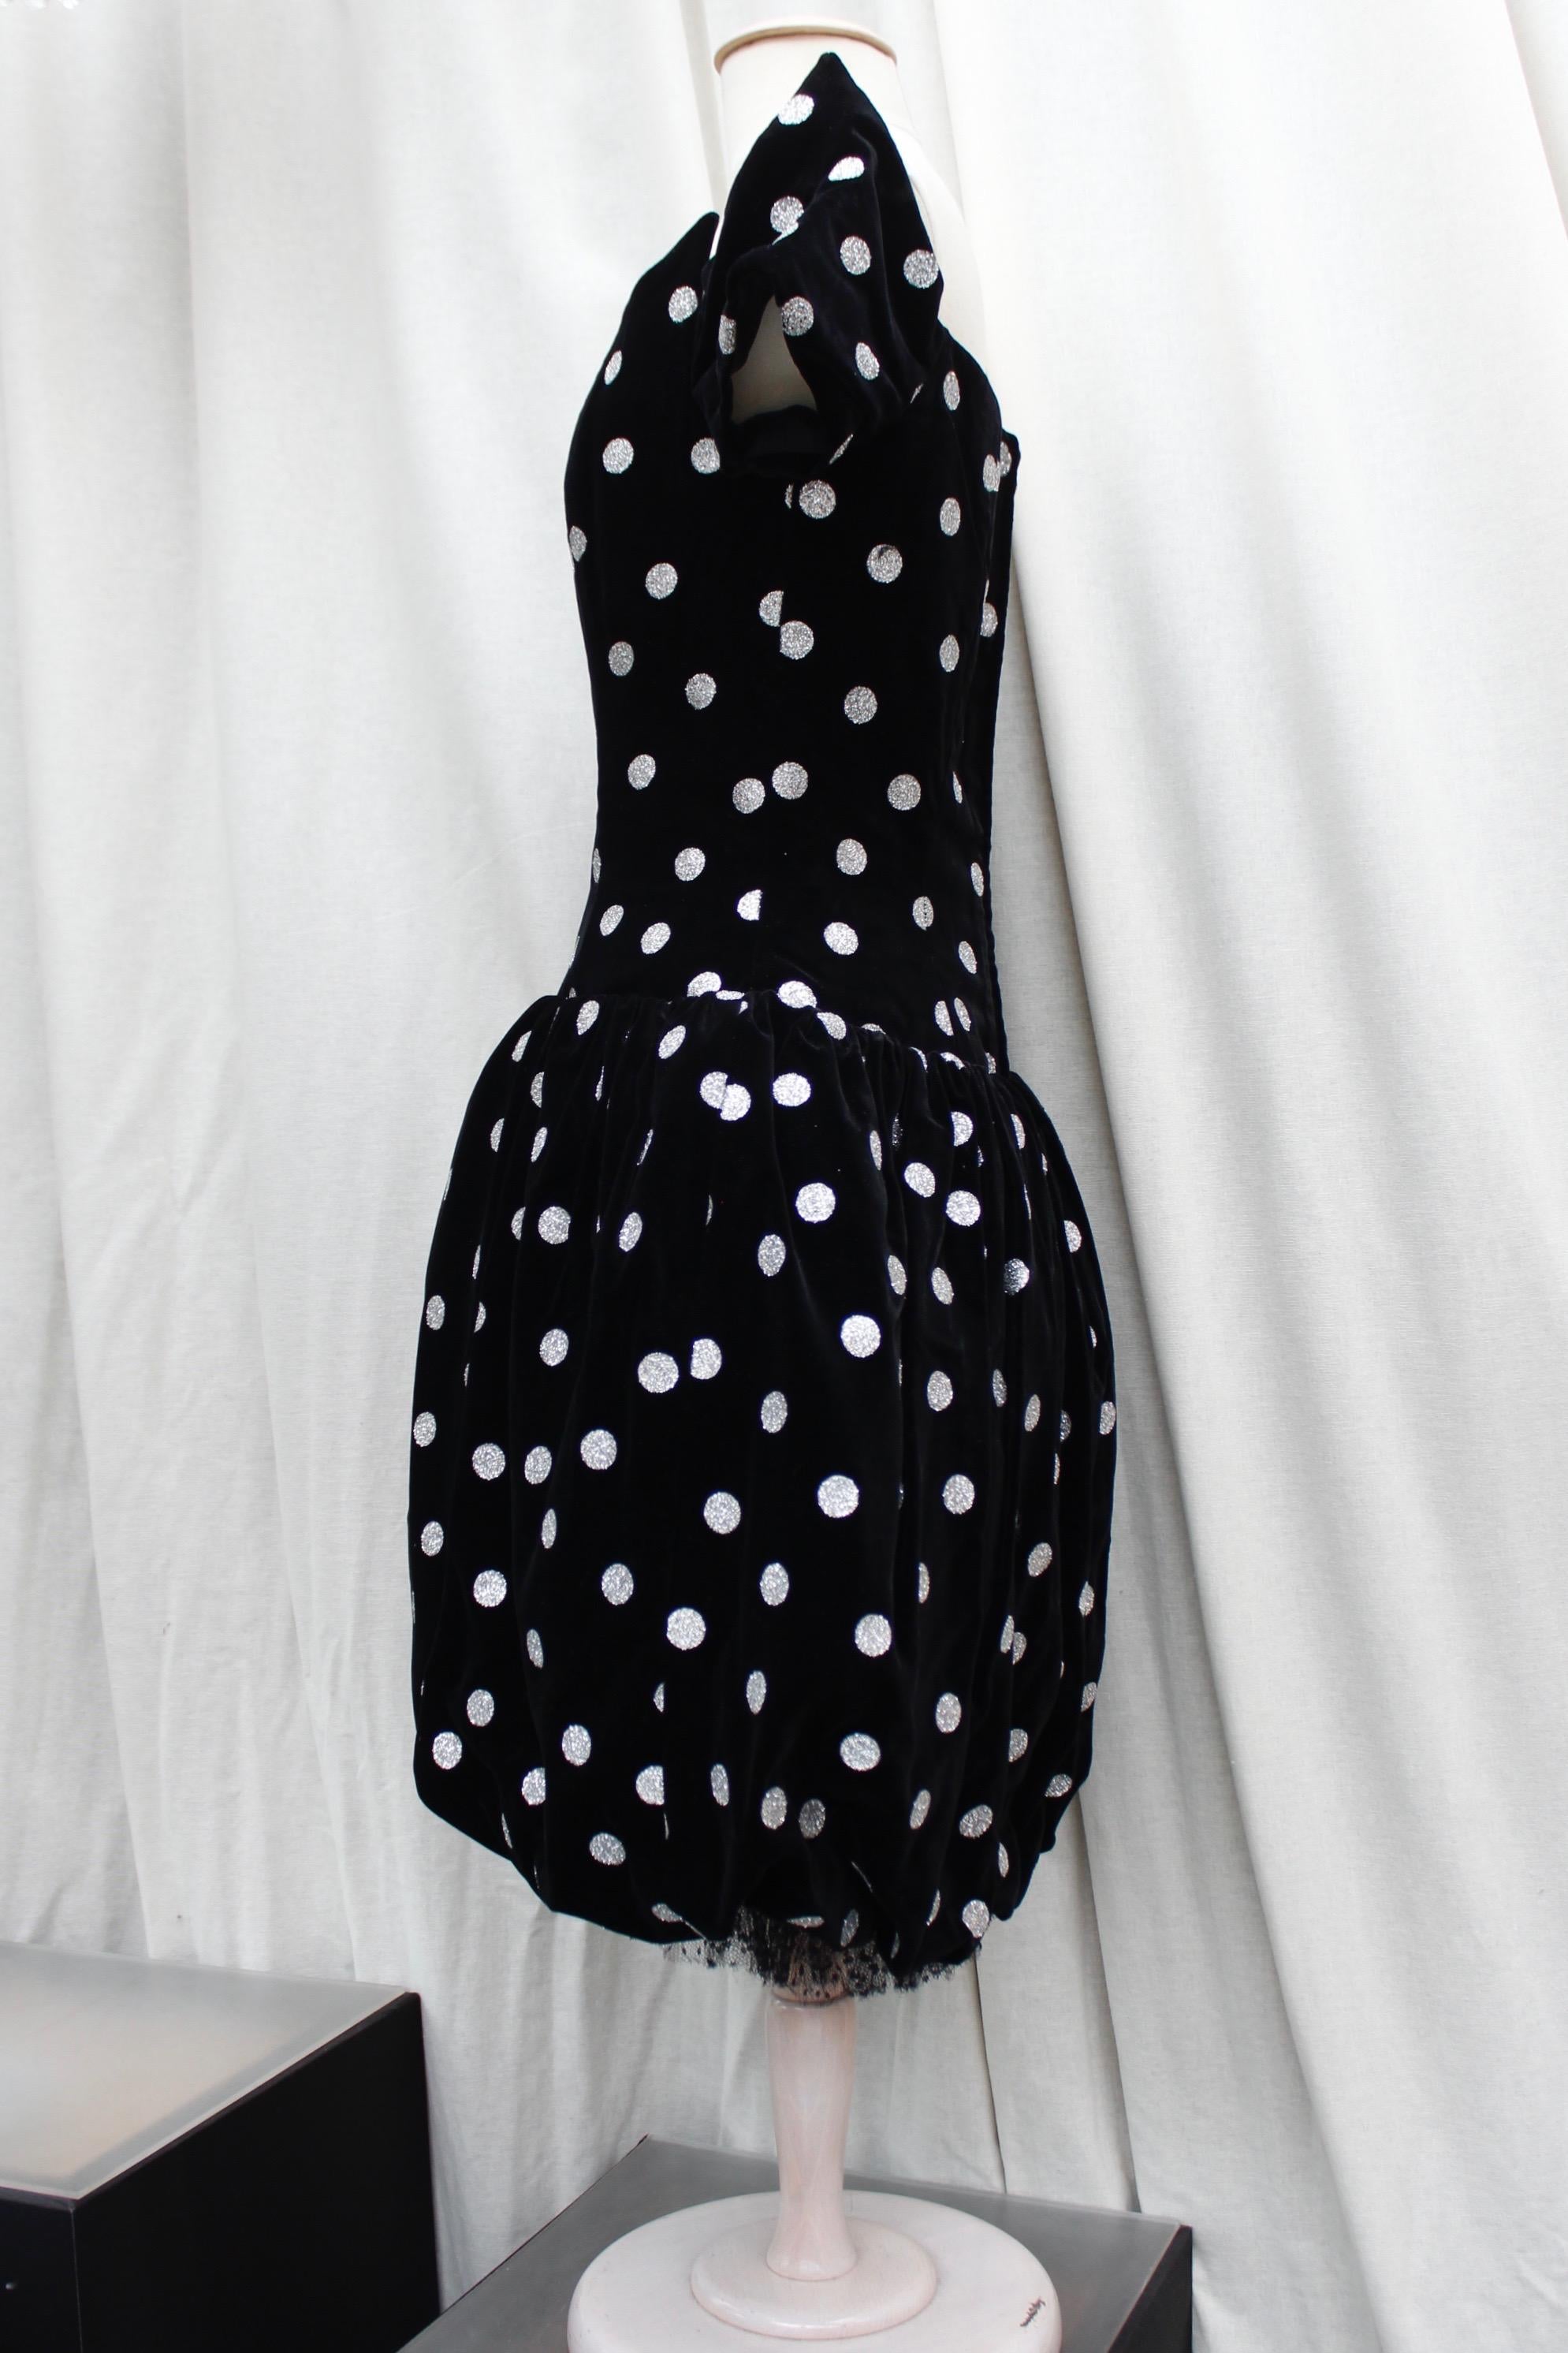 Women's Lanvin lovely ball-shaped dress in black velvet with silvery dots For Sale